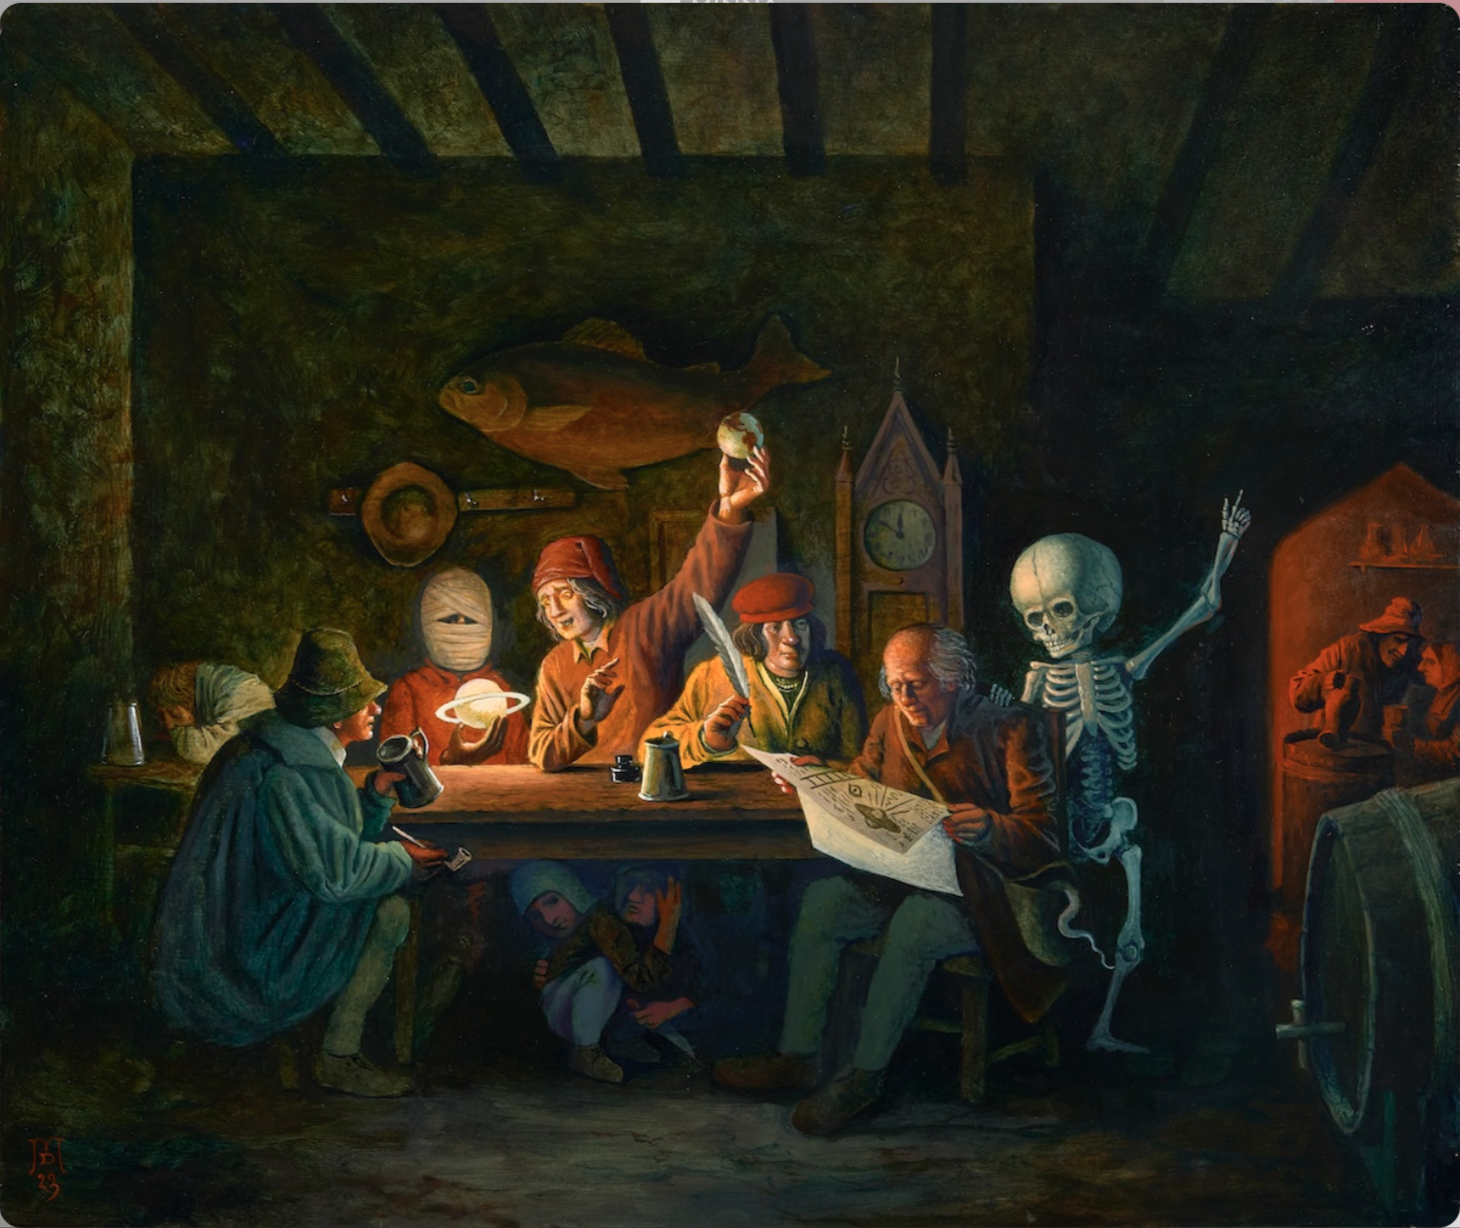 A dark medieval tavern with gathered drinkers. One, with a bandaged face, holds a glowing model of Saturn. Another sits in front of a waving skeleton with oversized head.